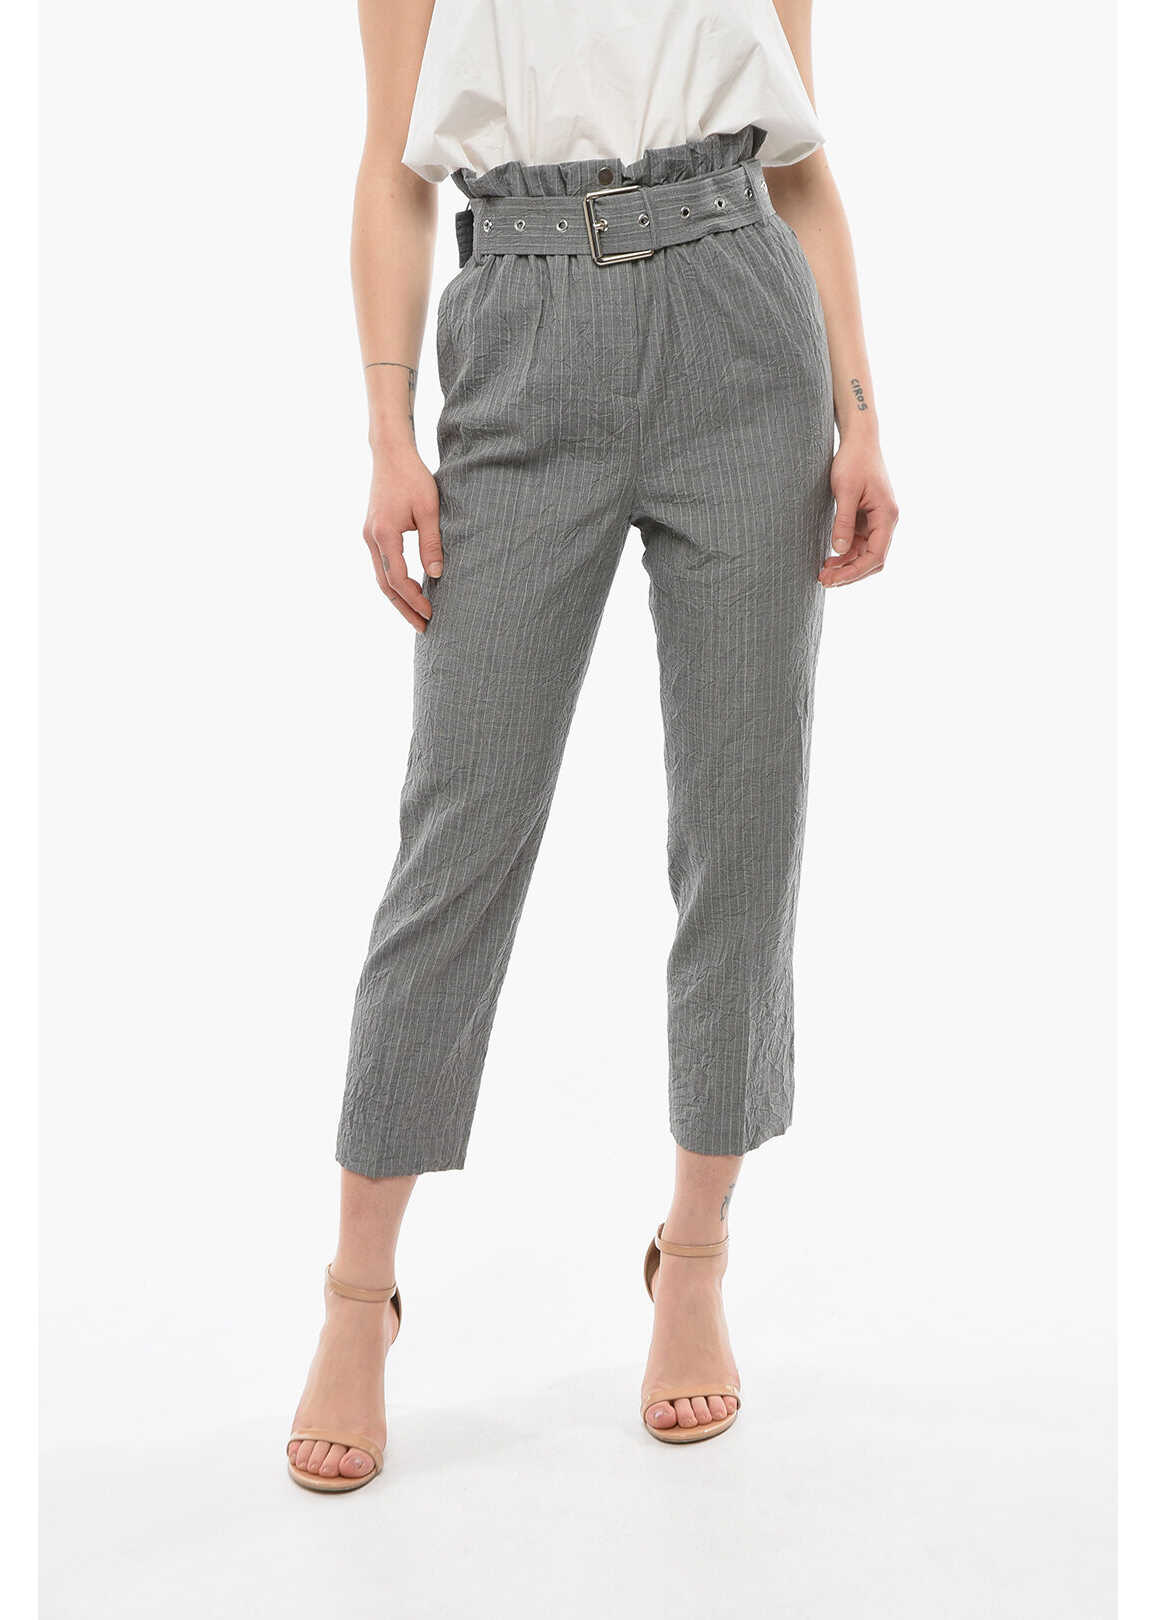 Michael Kors Collection Pinstripe Paperbag Pants With Belt Gray